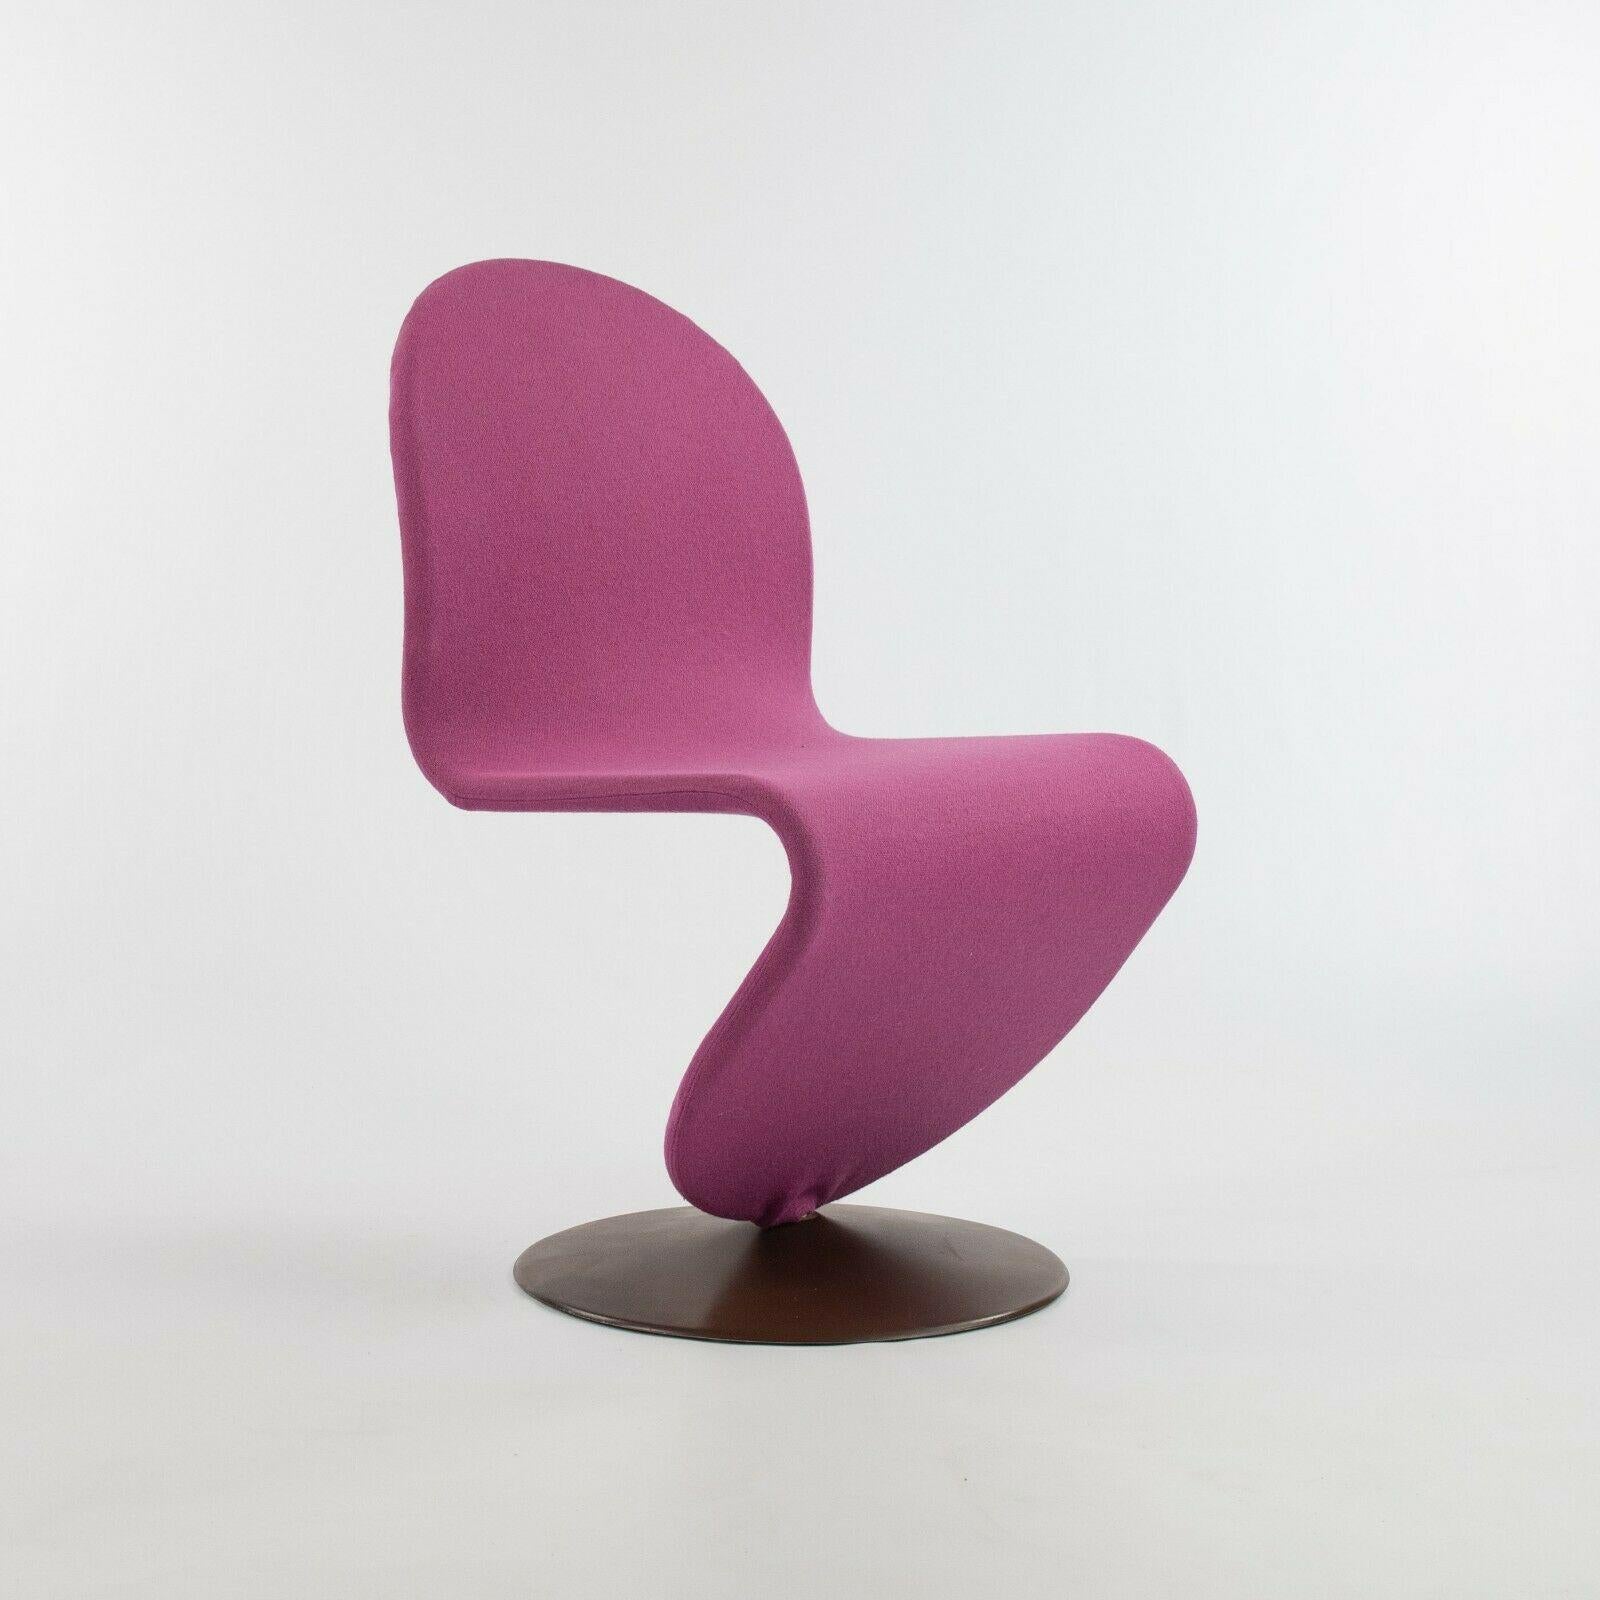 Danish 1970s Verner Panton for Fritz Hansen 1-2-3 Dining Side Chair in Magenta Fabric For Sale